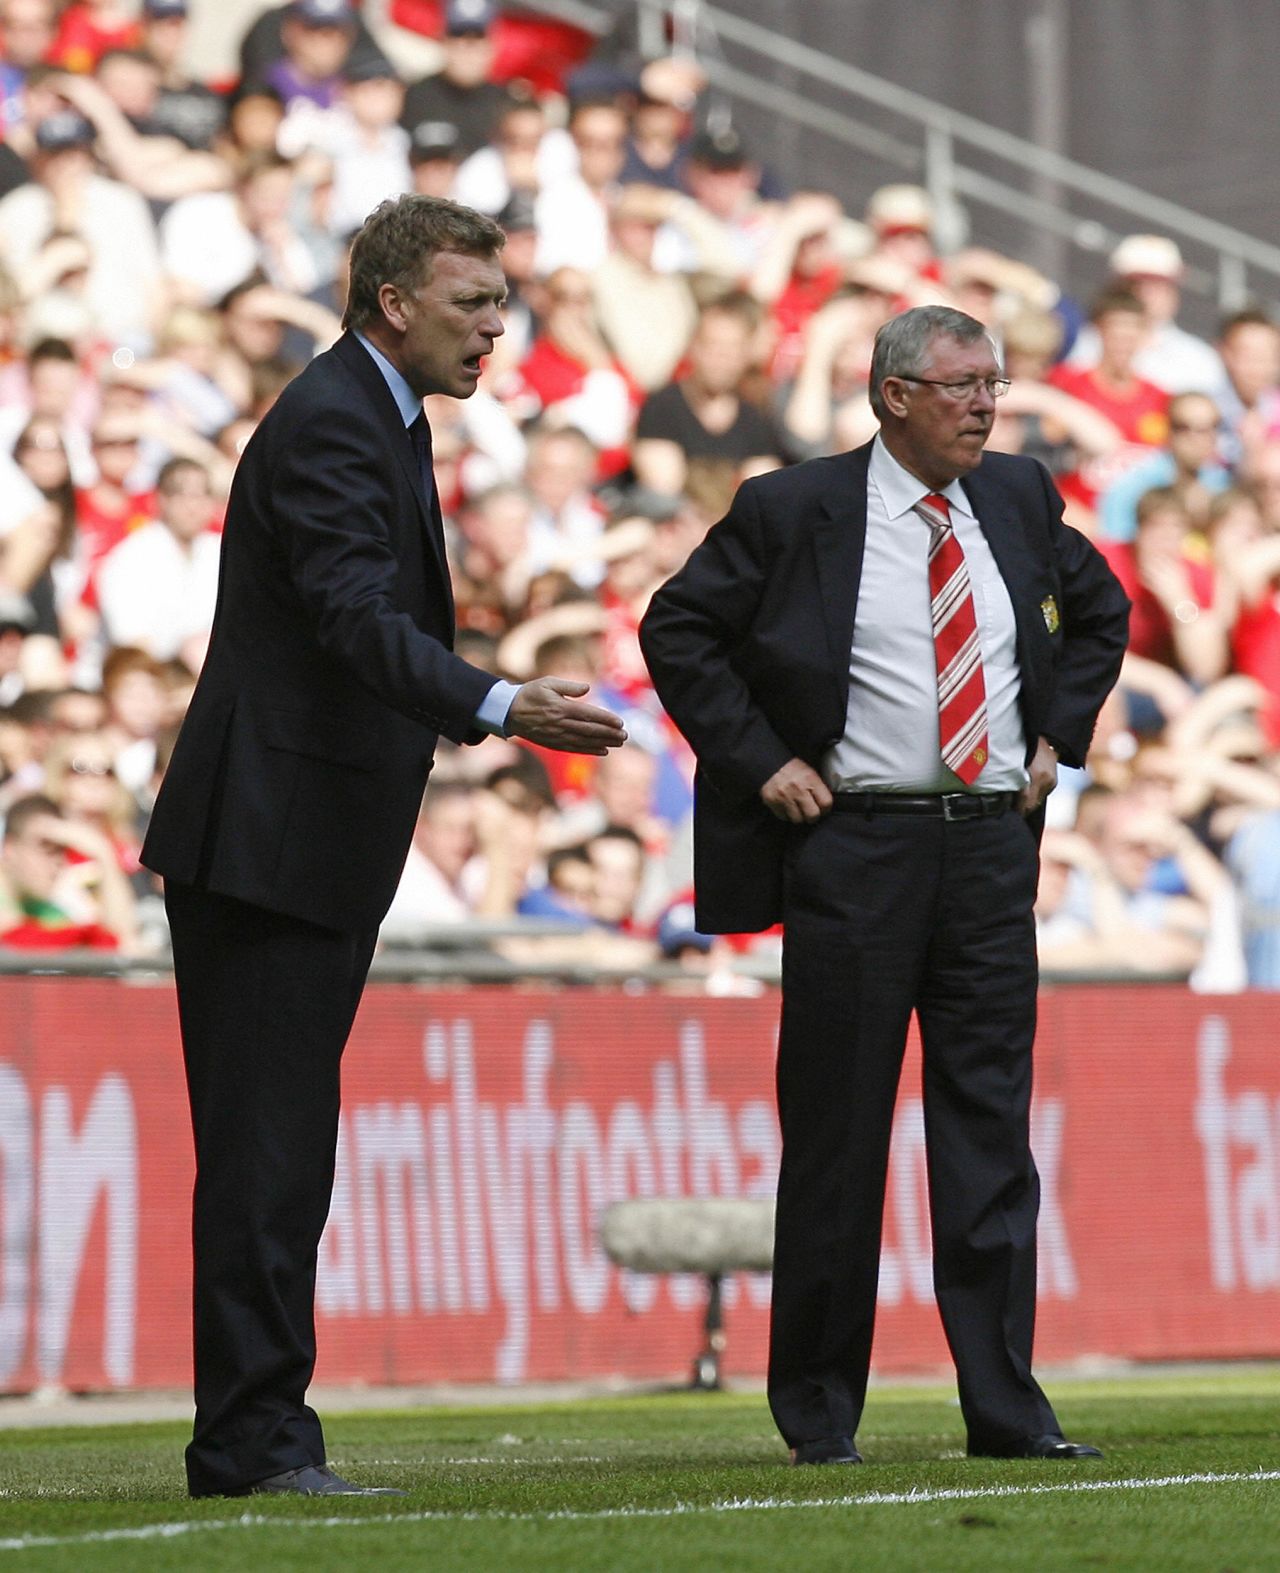 Everton manager David Moyes (left) and Manchester United's soon-to-retire boss Alex Ferguson (right) are pictured during the FA Cup semifinal match between their two teams at Wembley Stadium in April 2009. United announced Wednesday that Ferguson, 71, will be retiring at the end of the season after more than a quarter of a century at the helm.